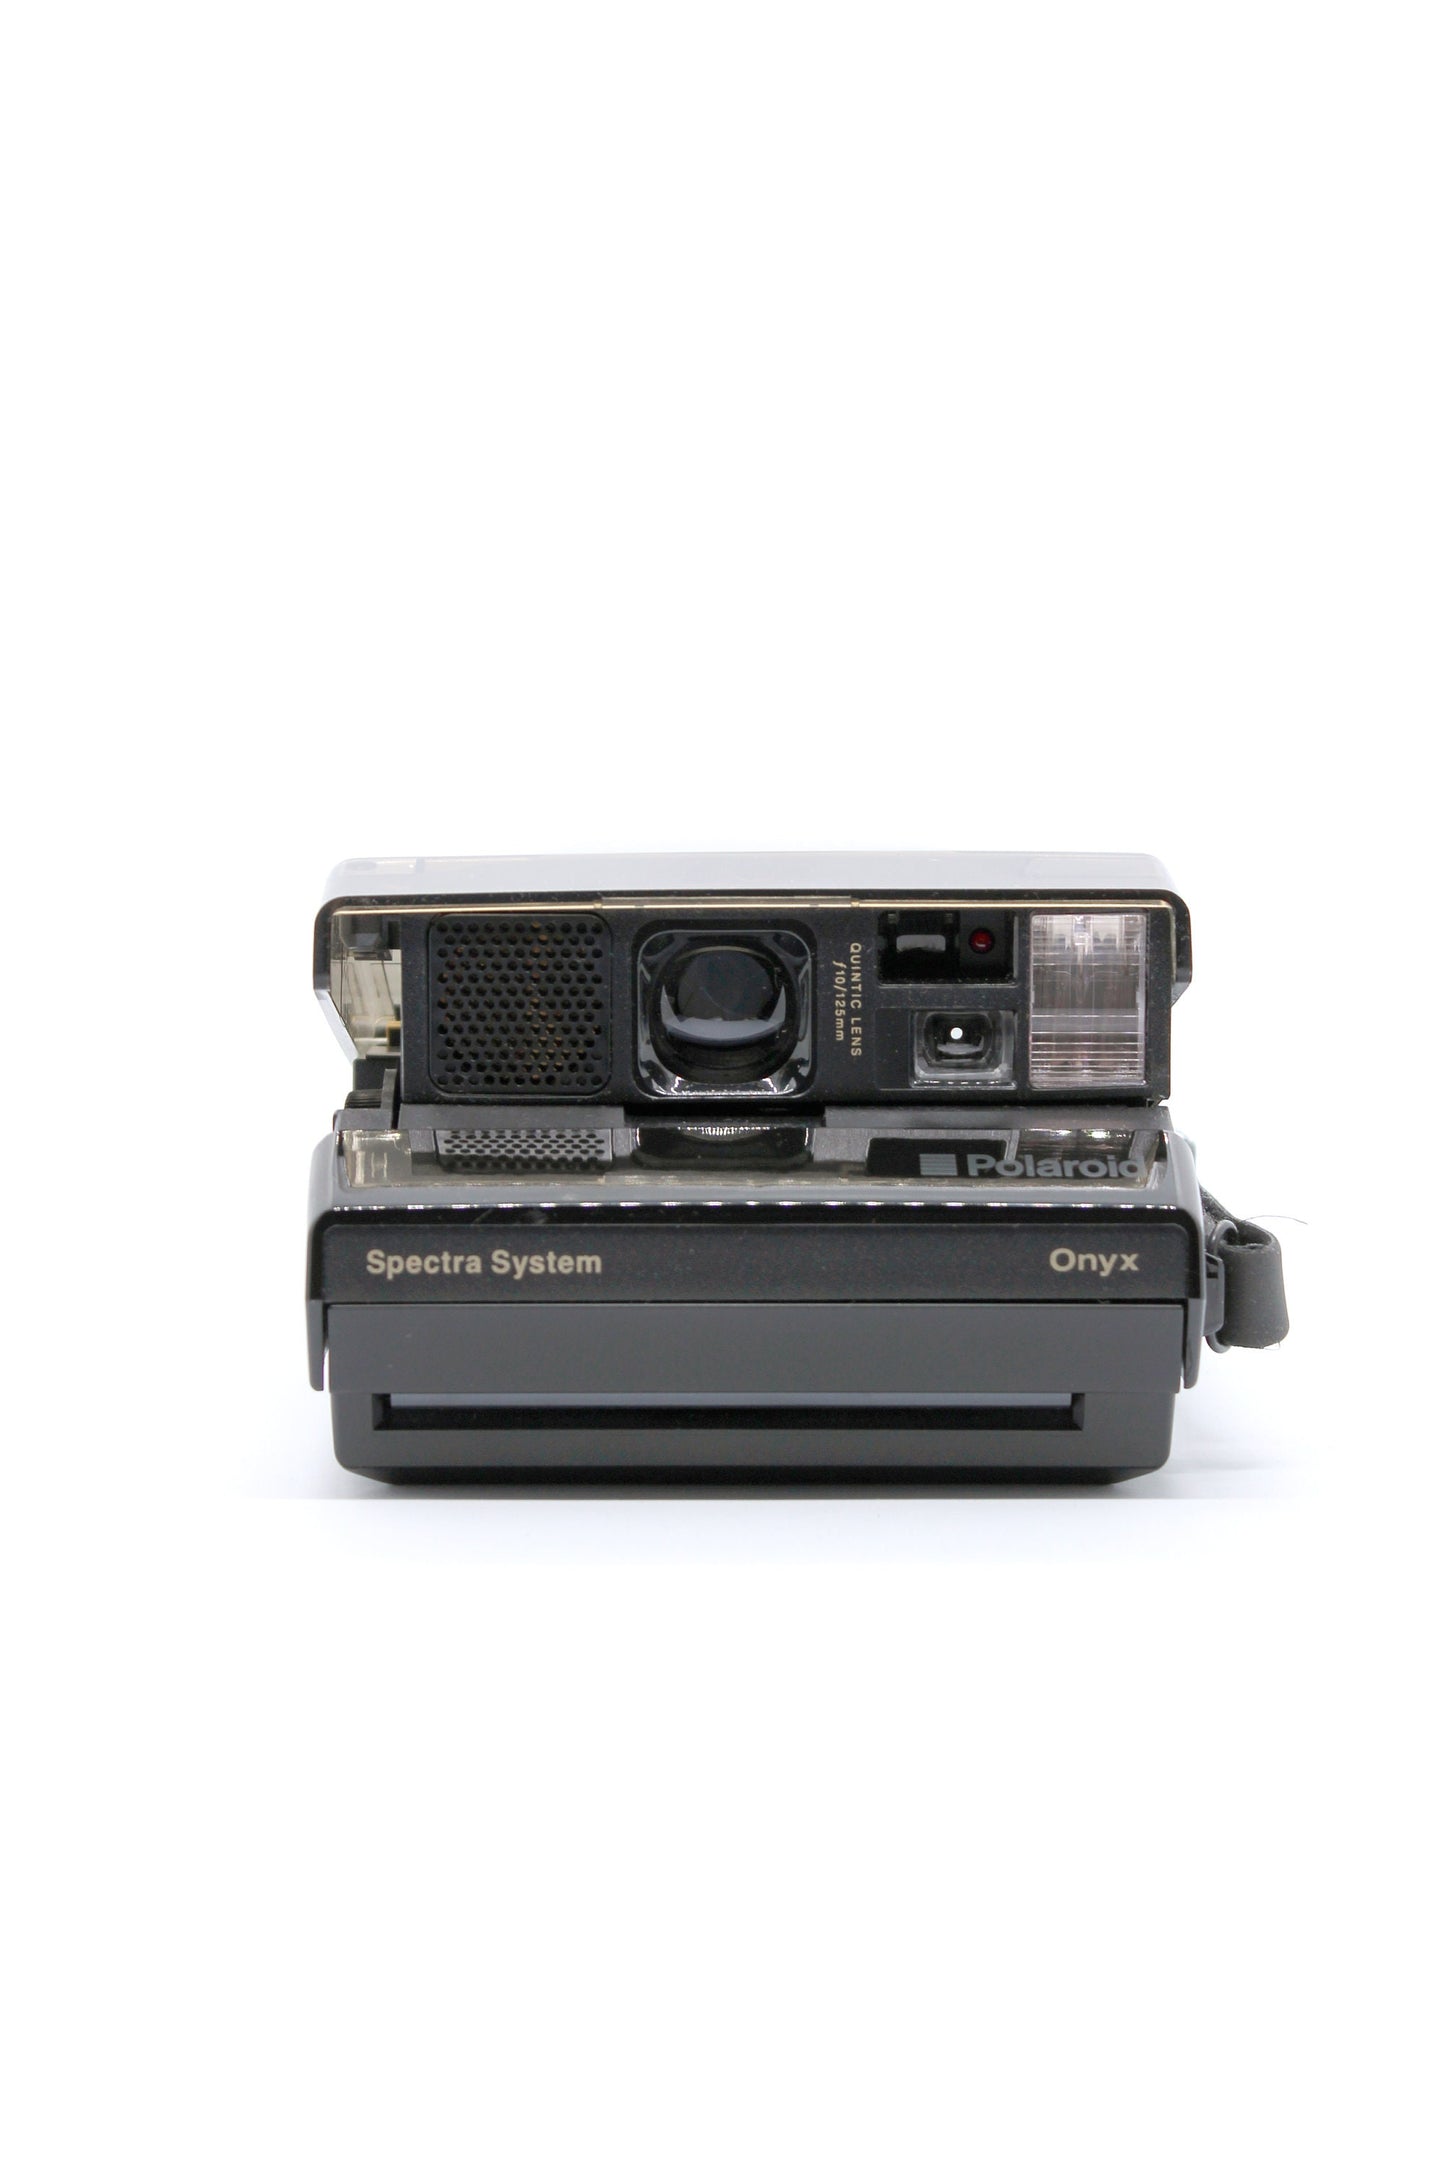 Polaroid Spectra ONYX Anniversary Edition Instant Camera See-Through + Filters + Case + Remote kit + 2 spectra Polaroid film packs